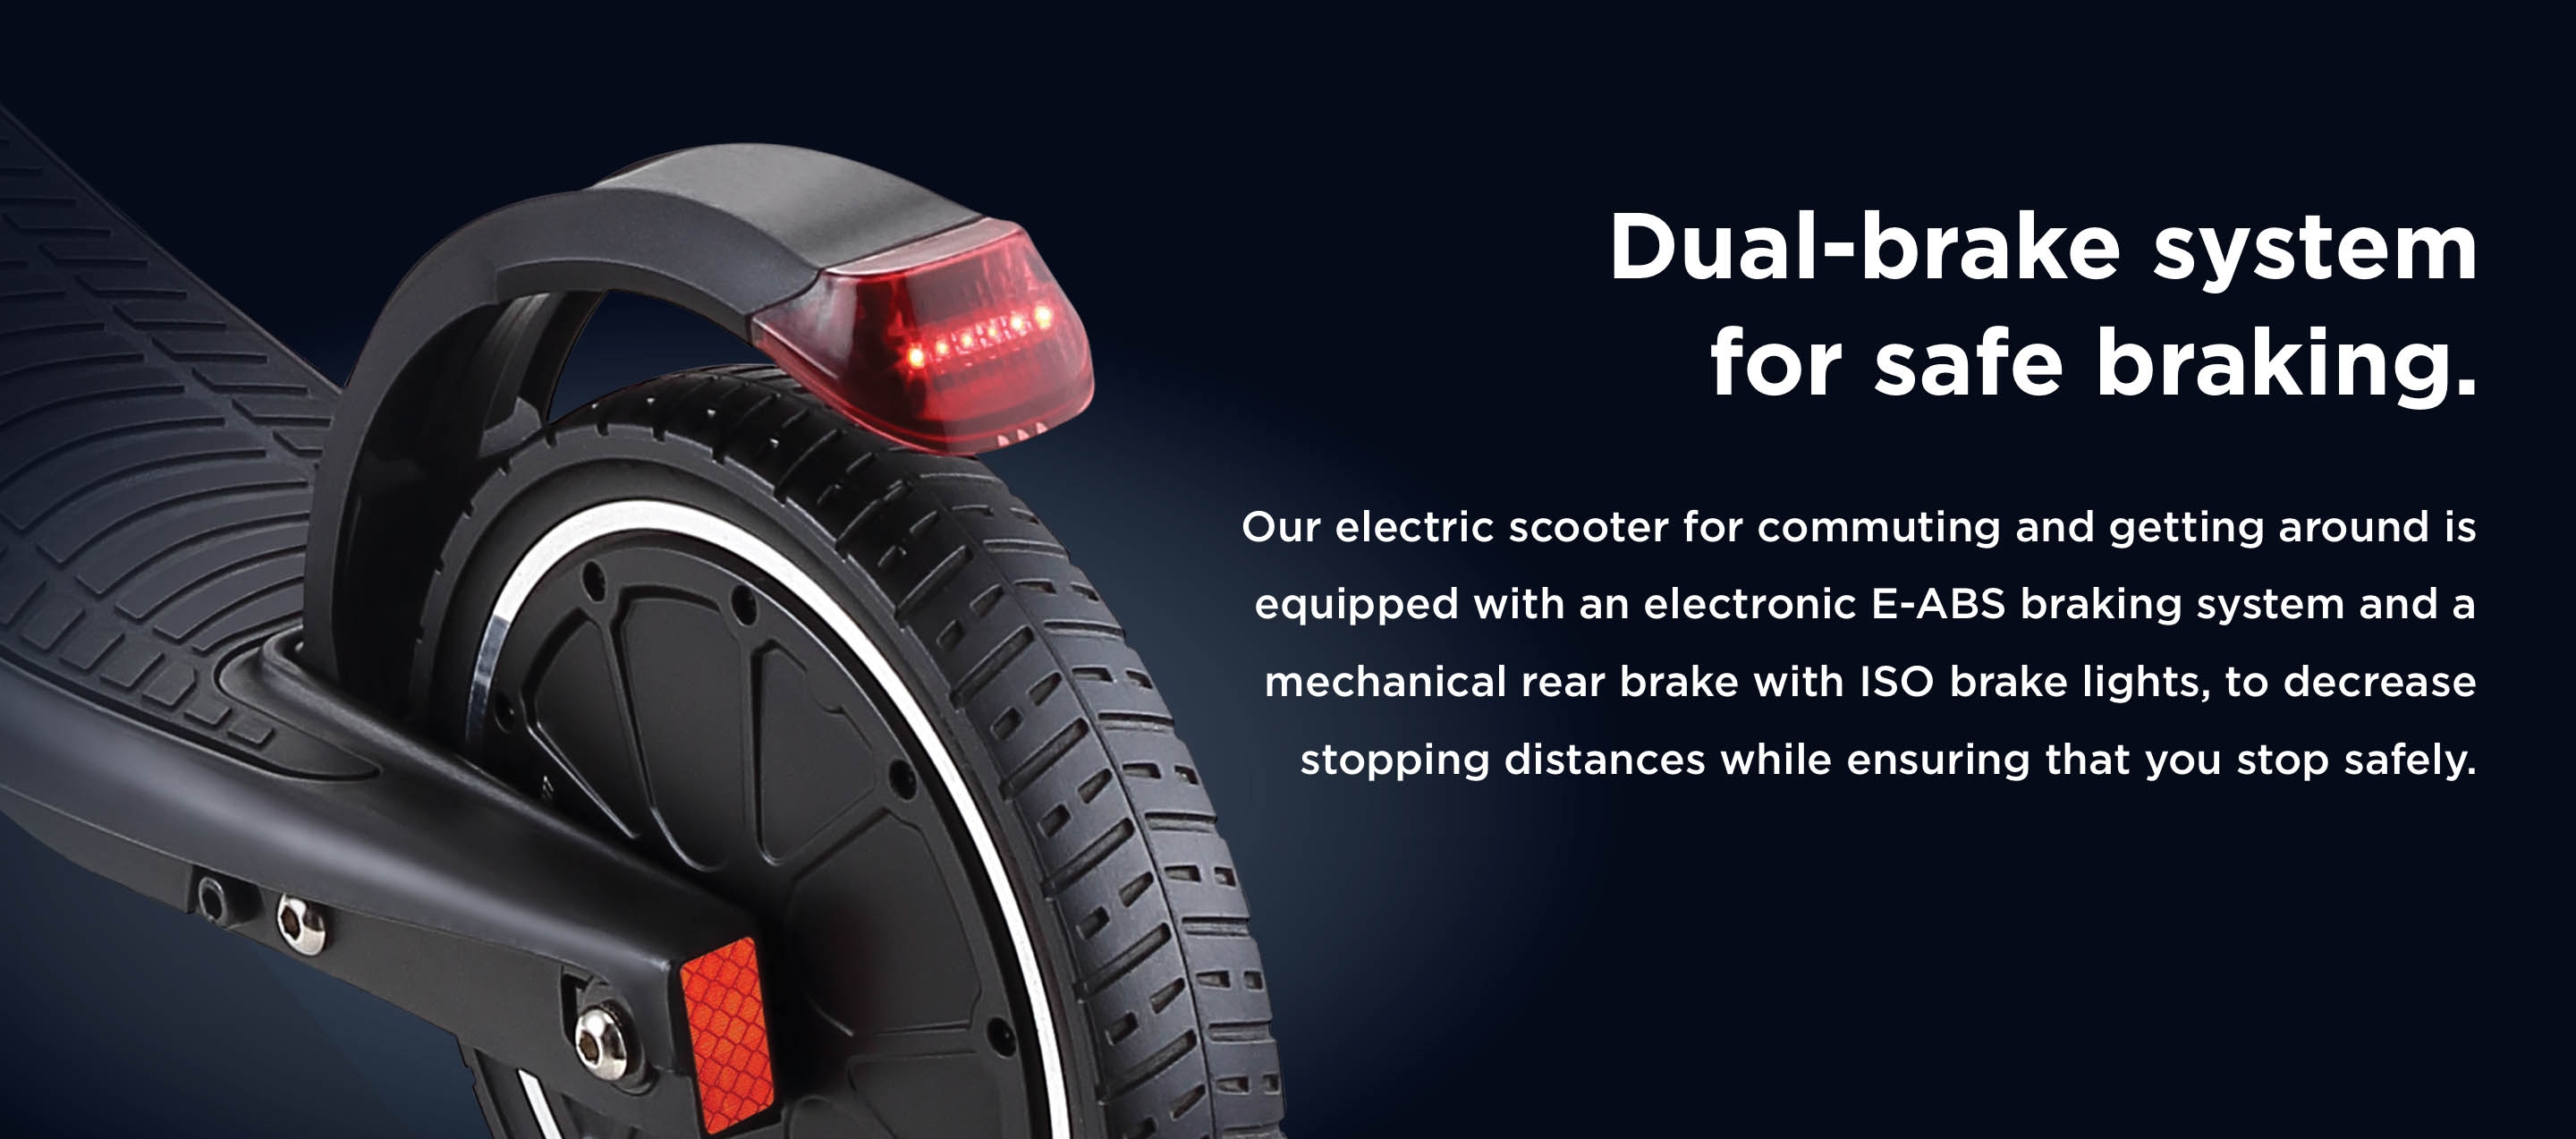 Dual-brake system for safe braking.  Our electric scooter for commuting and getting around is equipped with an electronic, E-ABS braking system and a mechanical rear brake, to decrease stopping distances while ensuring that you stop safely.